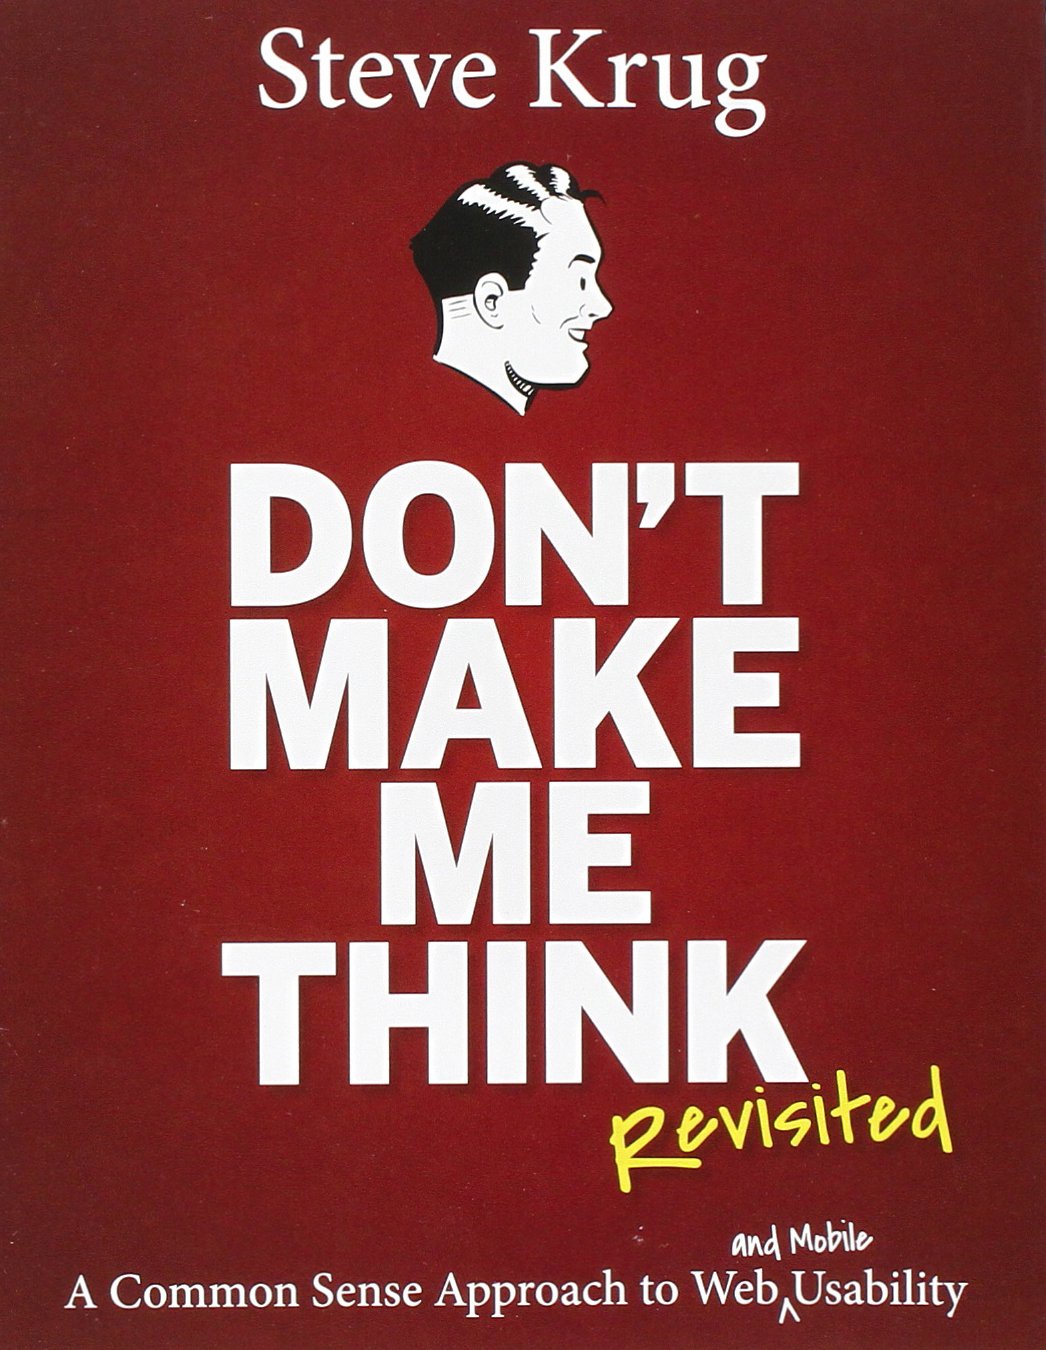 Link to Book Review: Don't make me think